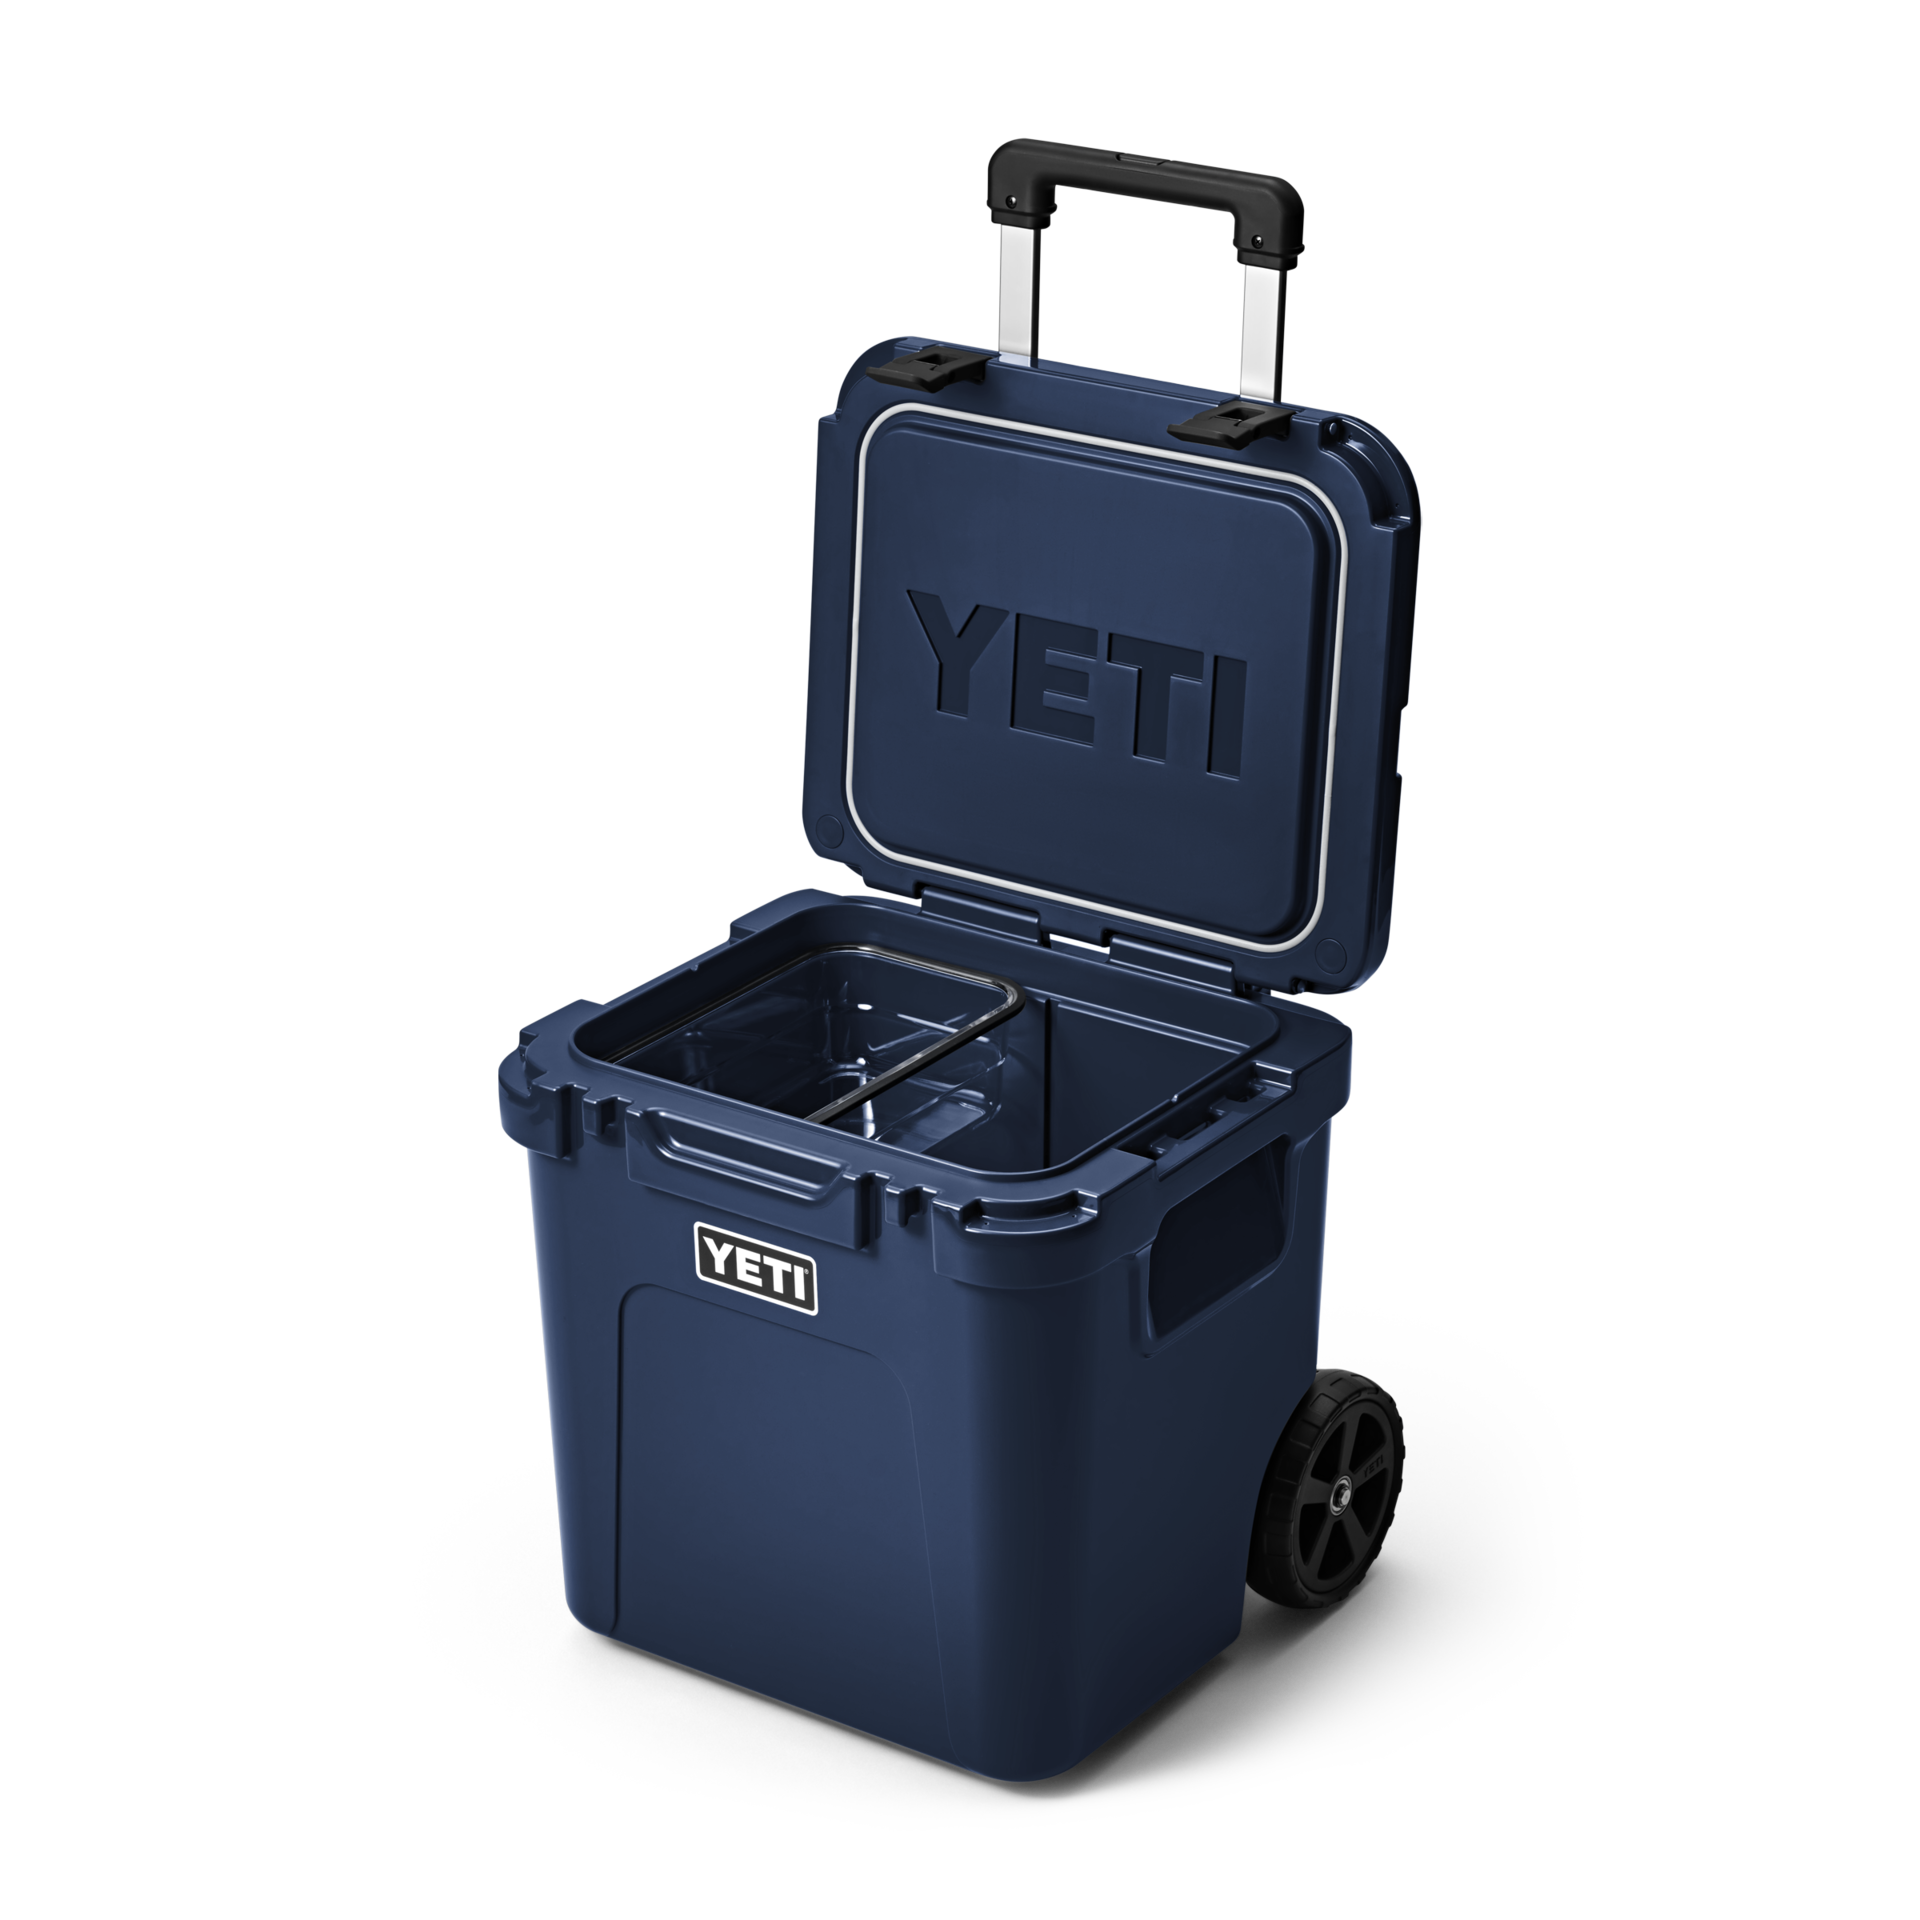 YETI Roadie 48 Wheeled Cool Box in navy with lid open